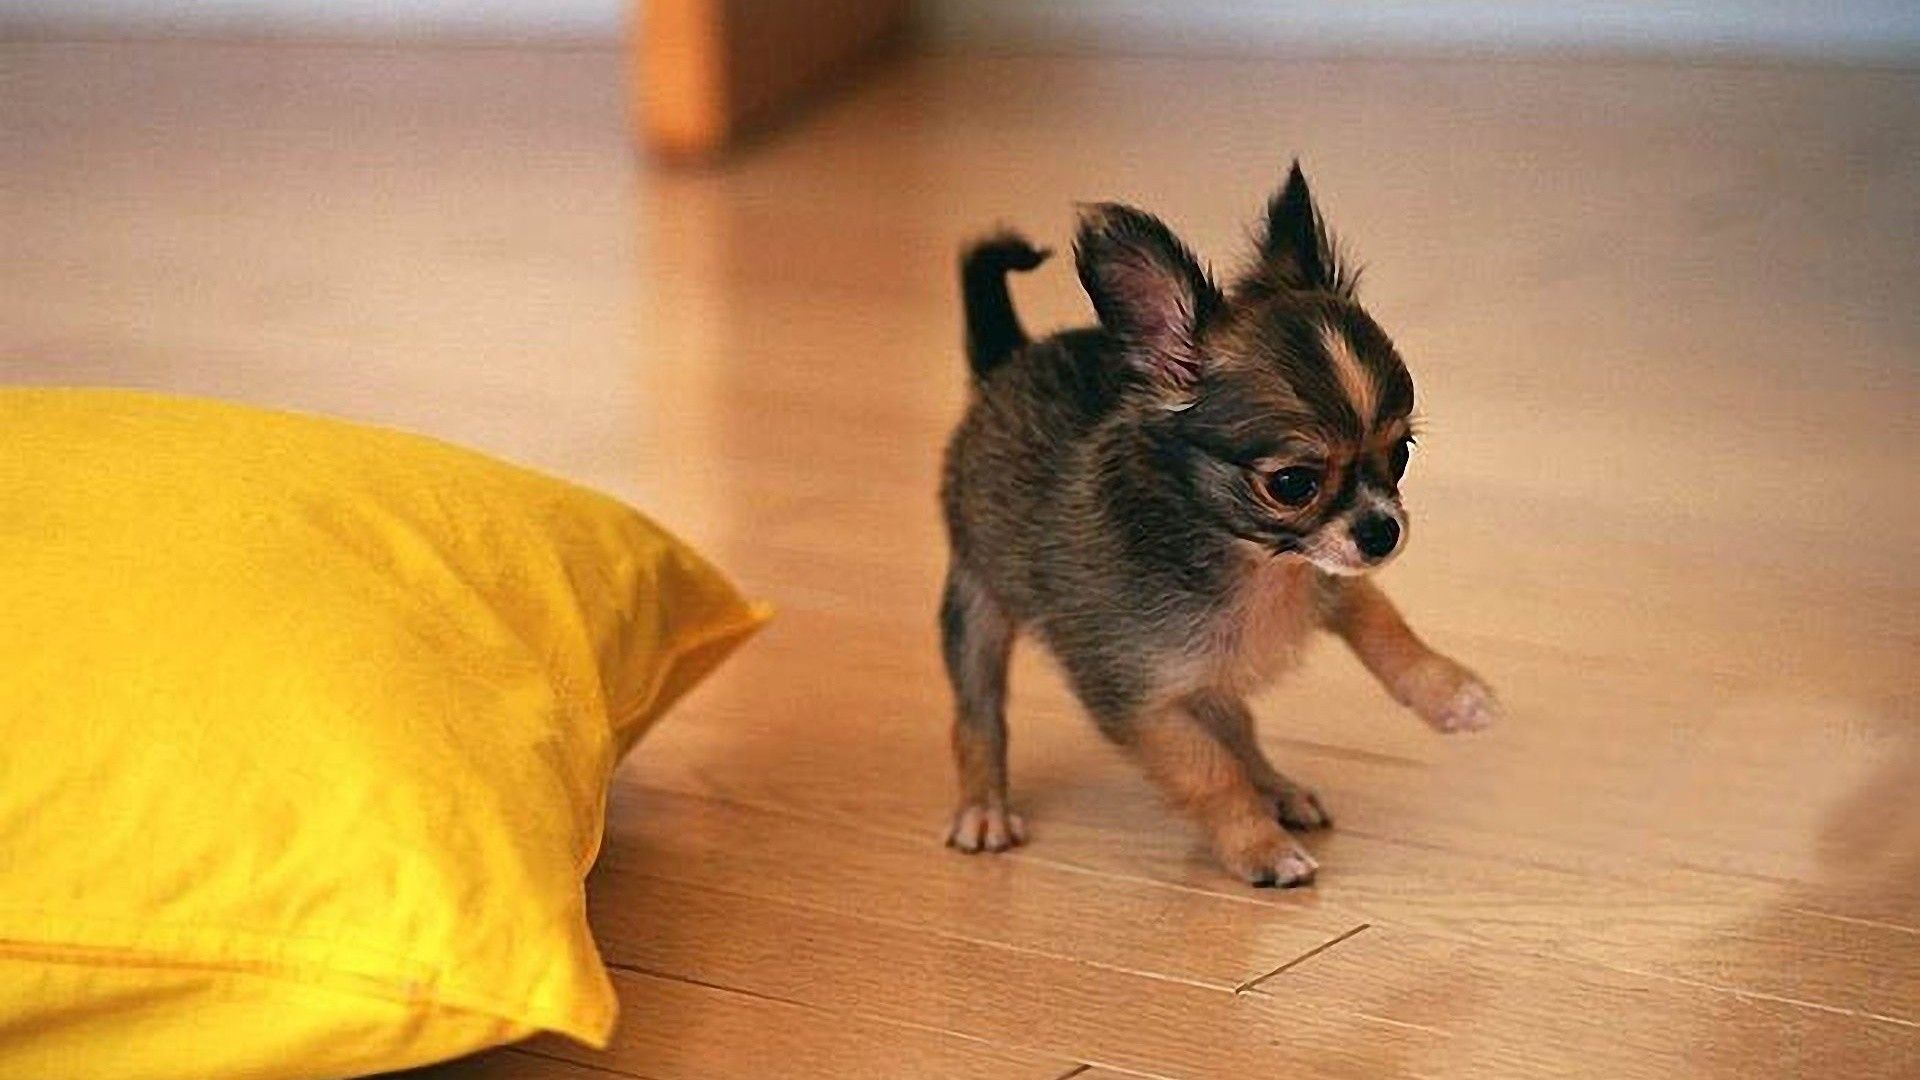 Chihuahuas Very Cute Puppy Wallpapers on